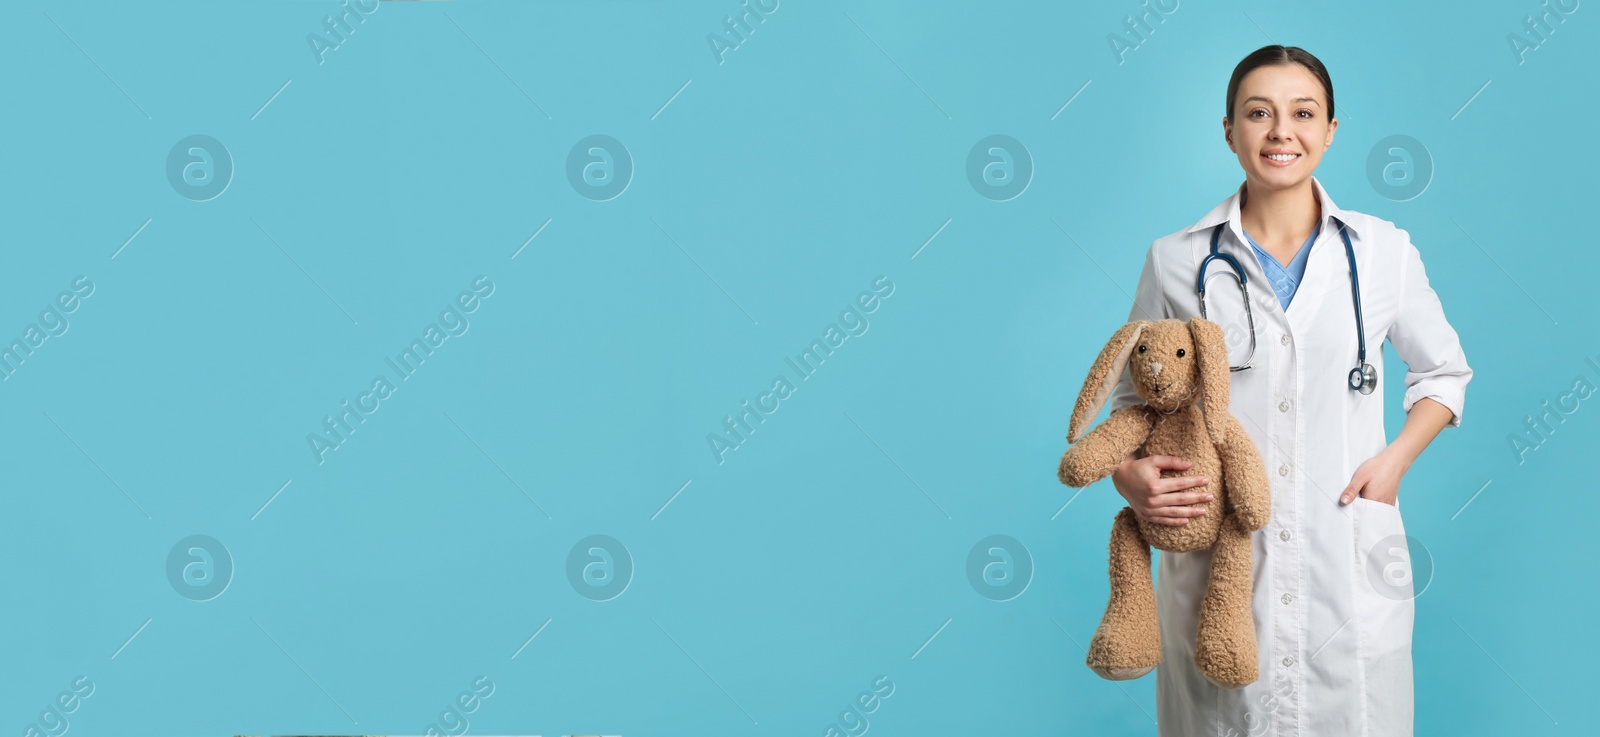 Photo of Pediatrician with toy bunny and stethoscope on turquoise background